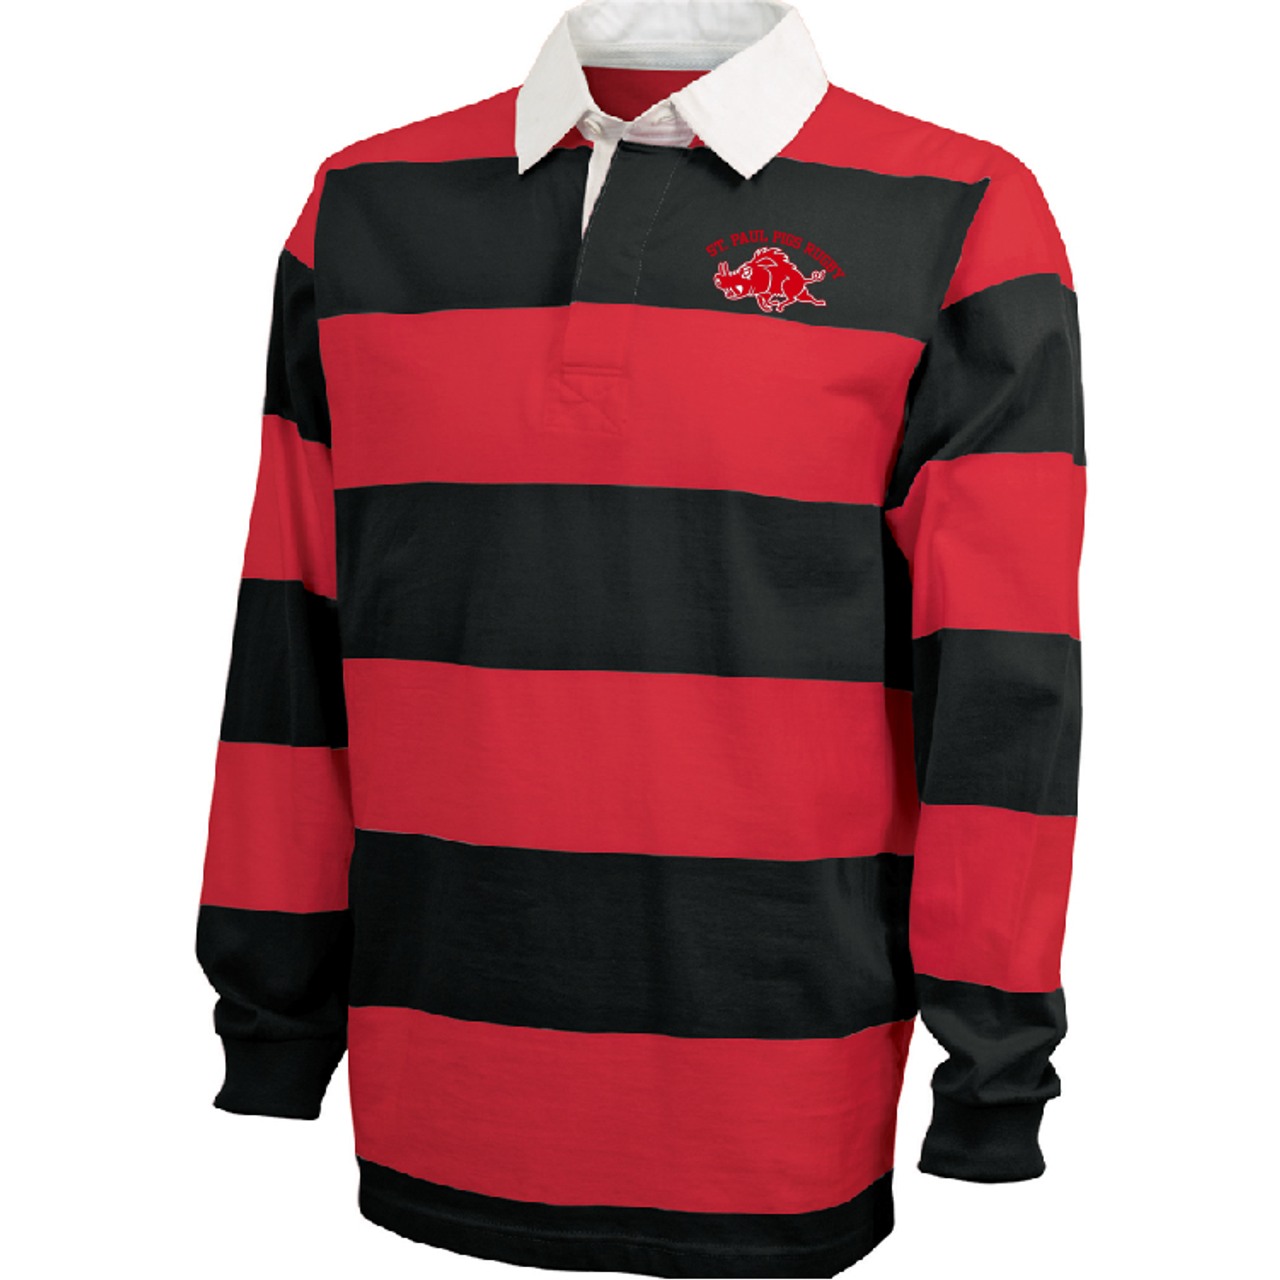 Black/Red rugby polo for St. Paul Pigs Rugby